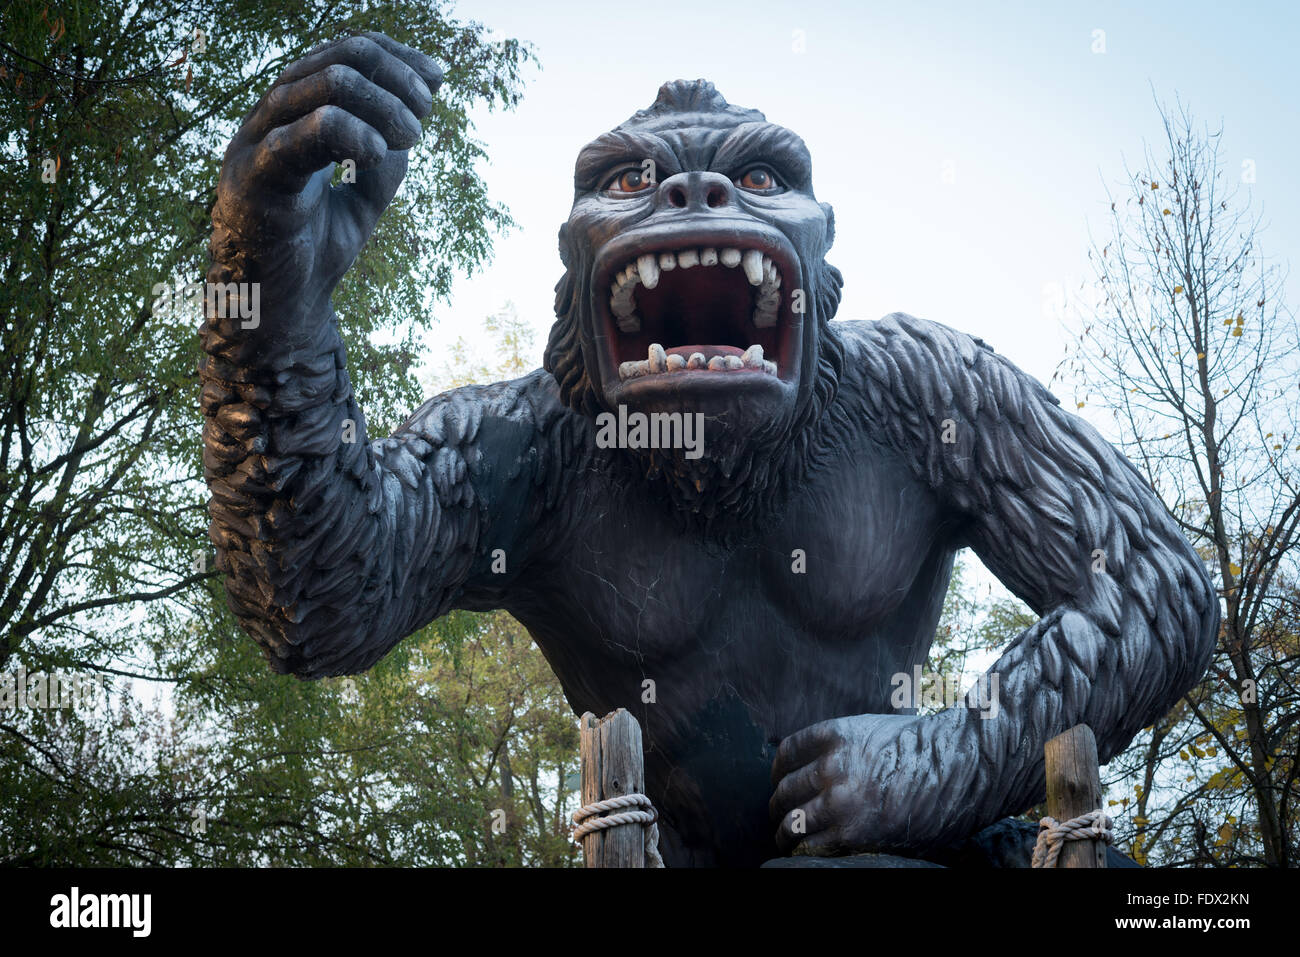 Giant King Kong High Resolution Stock Photography and Images - Alamy